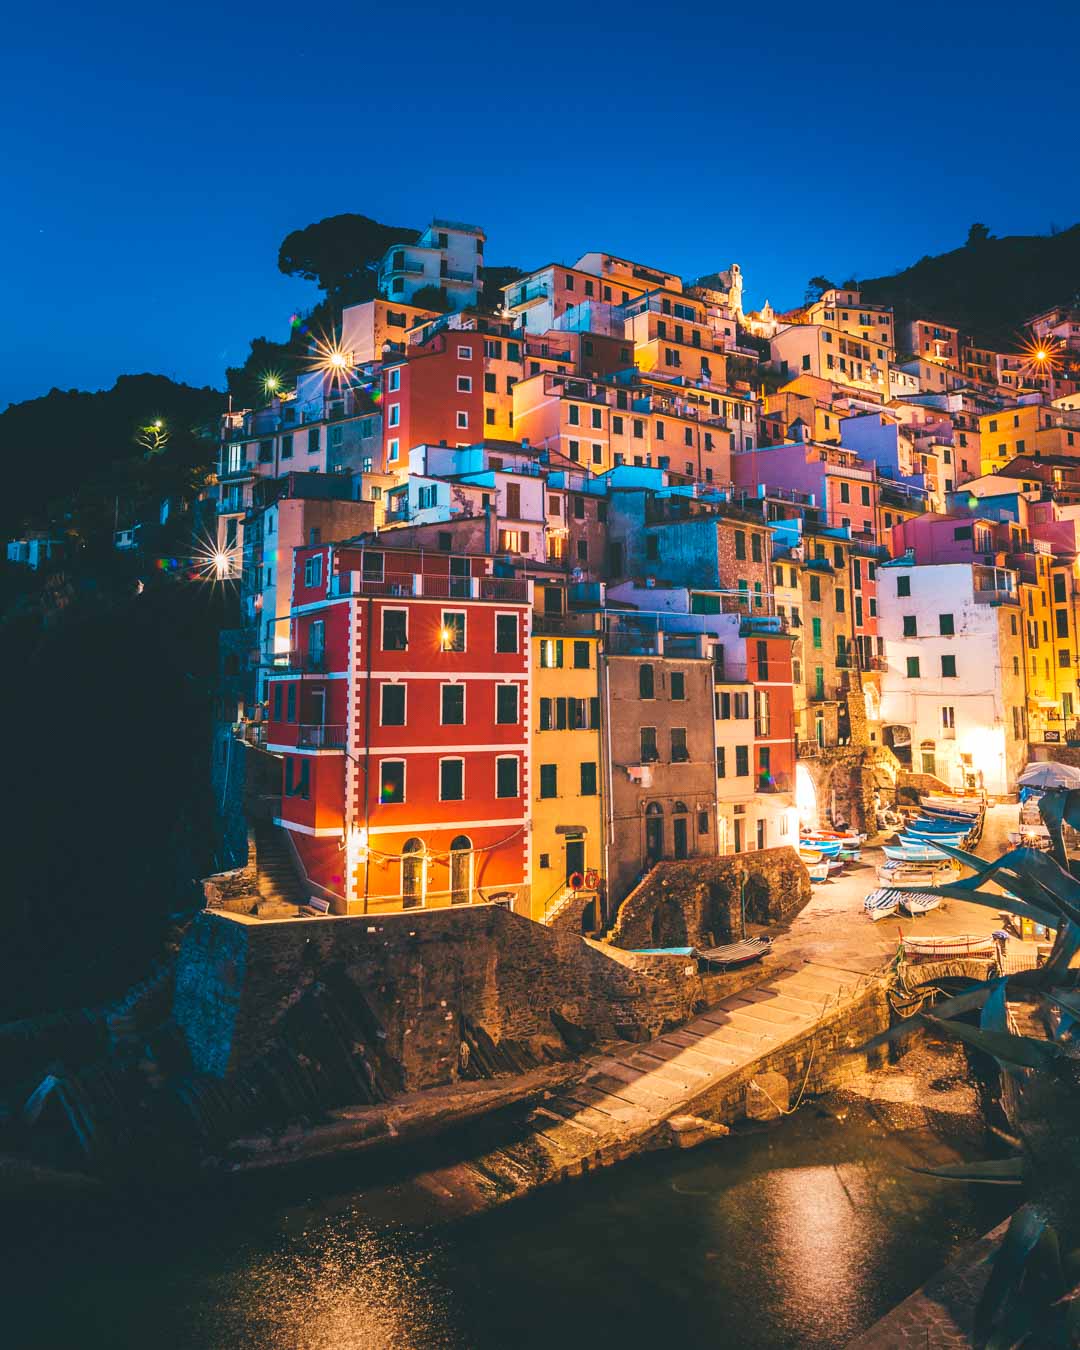 the houses of riomaggiore at night